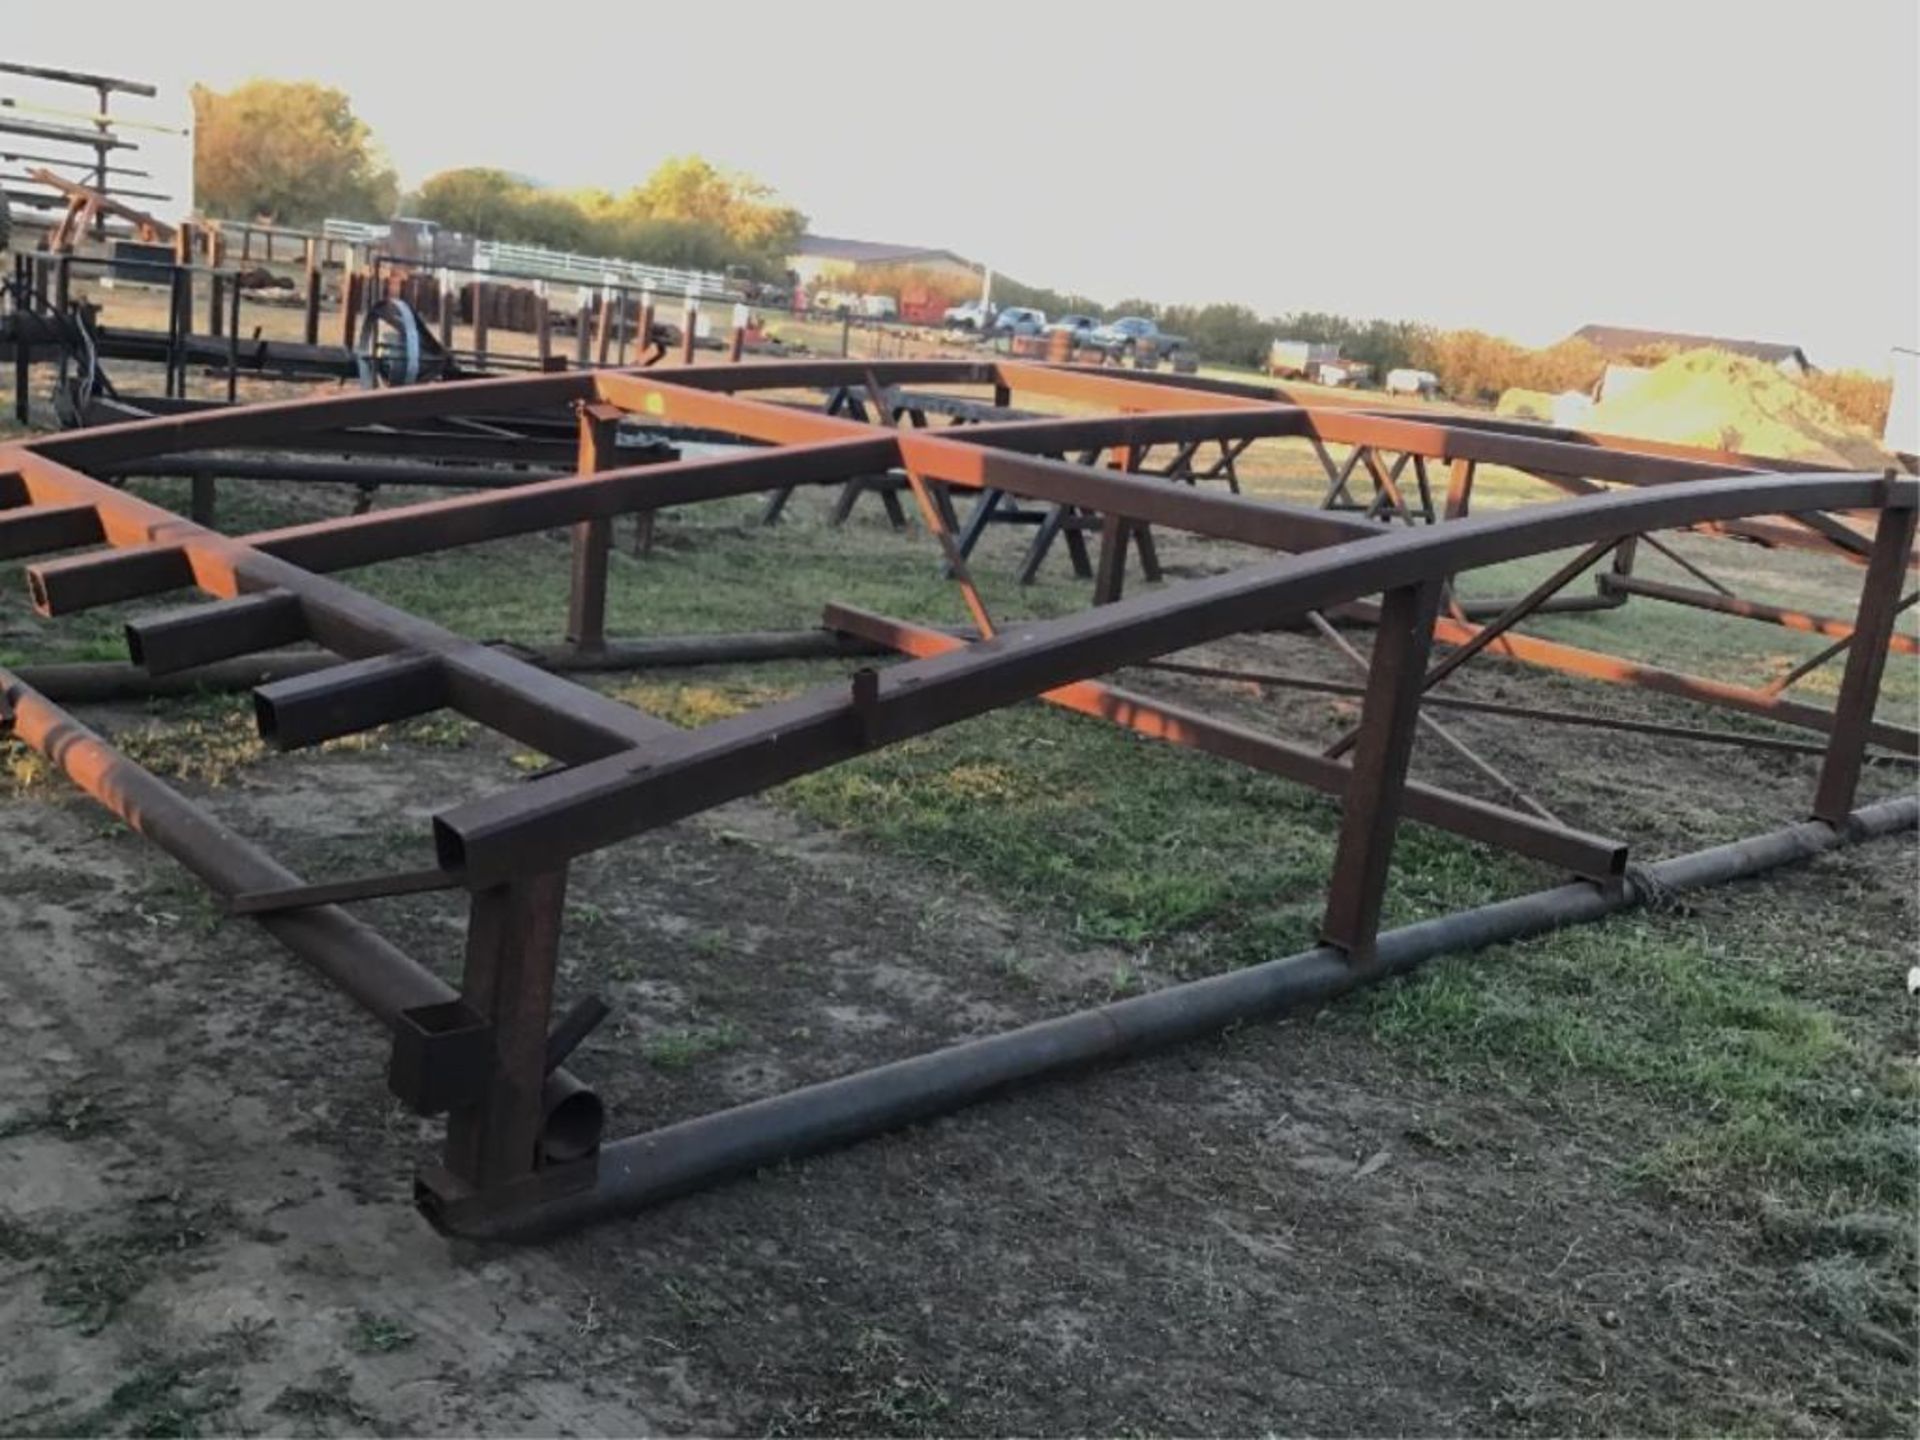 6400 Cube Frac Pond Manufacturing Jig 35Ft Long X 12Ft Wide - Image 2 of 2